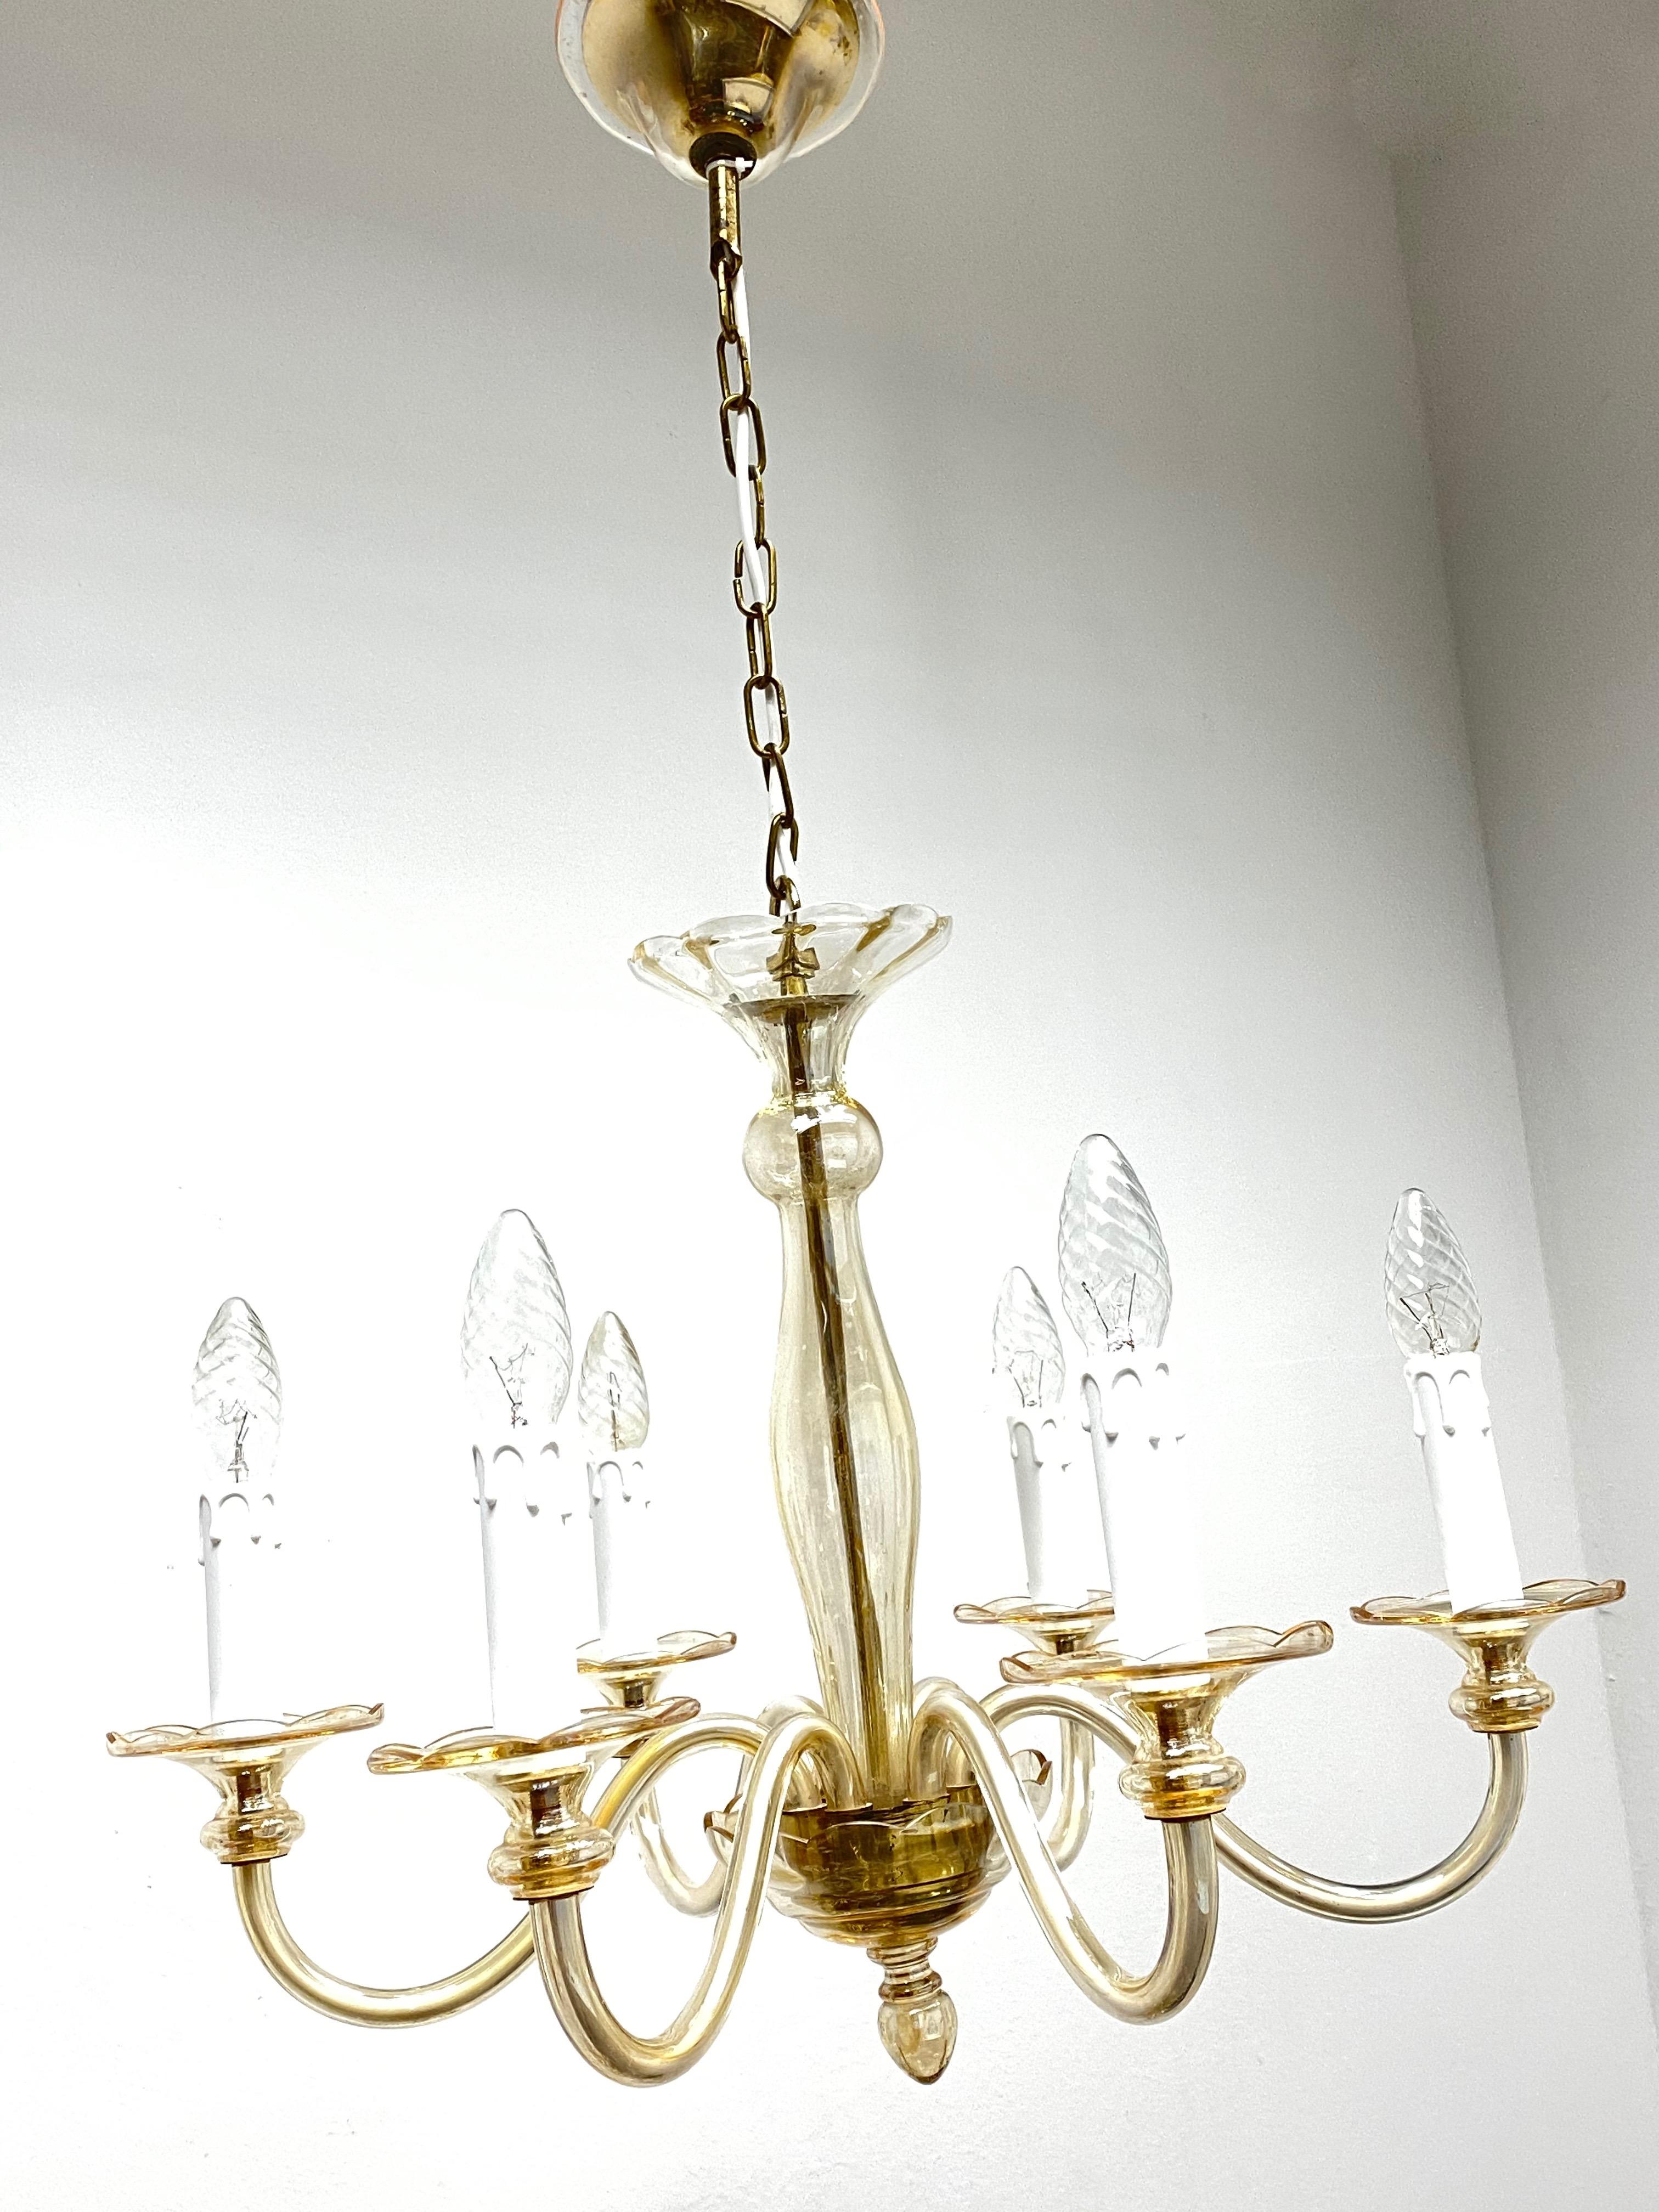 Mid-20th Century Hollywood Regency Art Deco Style Amber Murano Glass Chandelier, Italy, 1960s For Sale